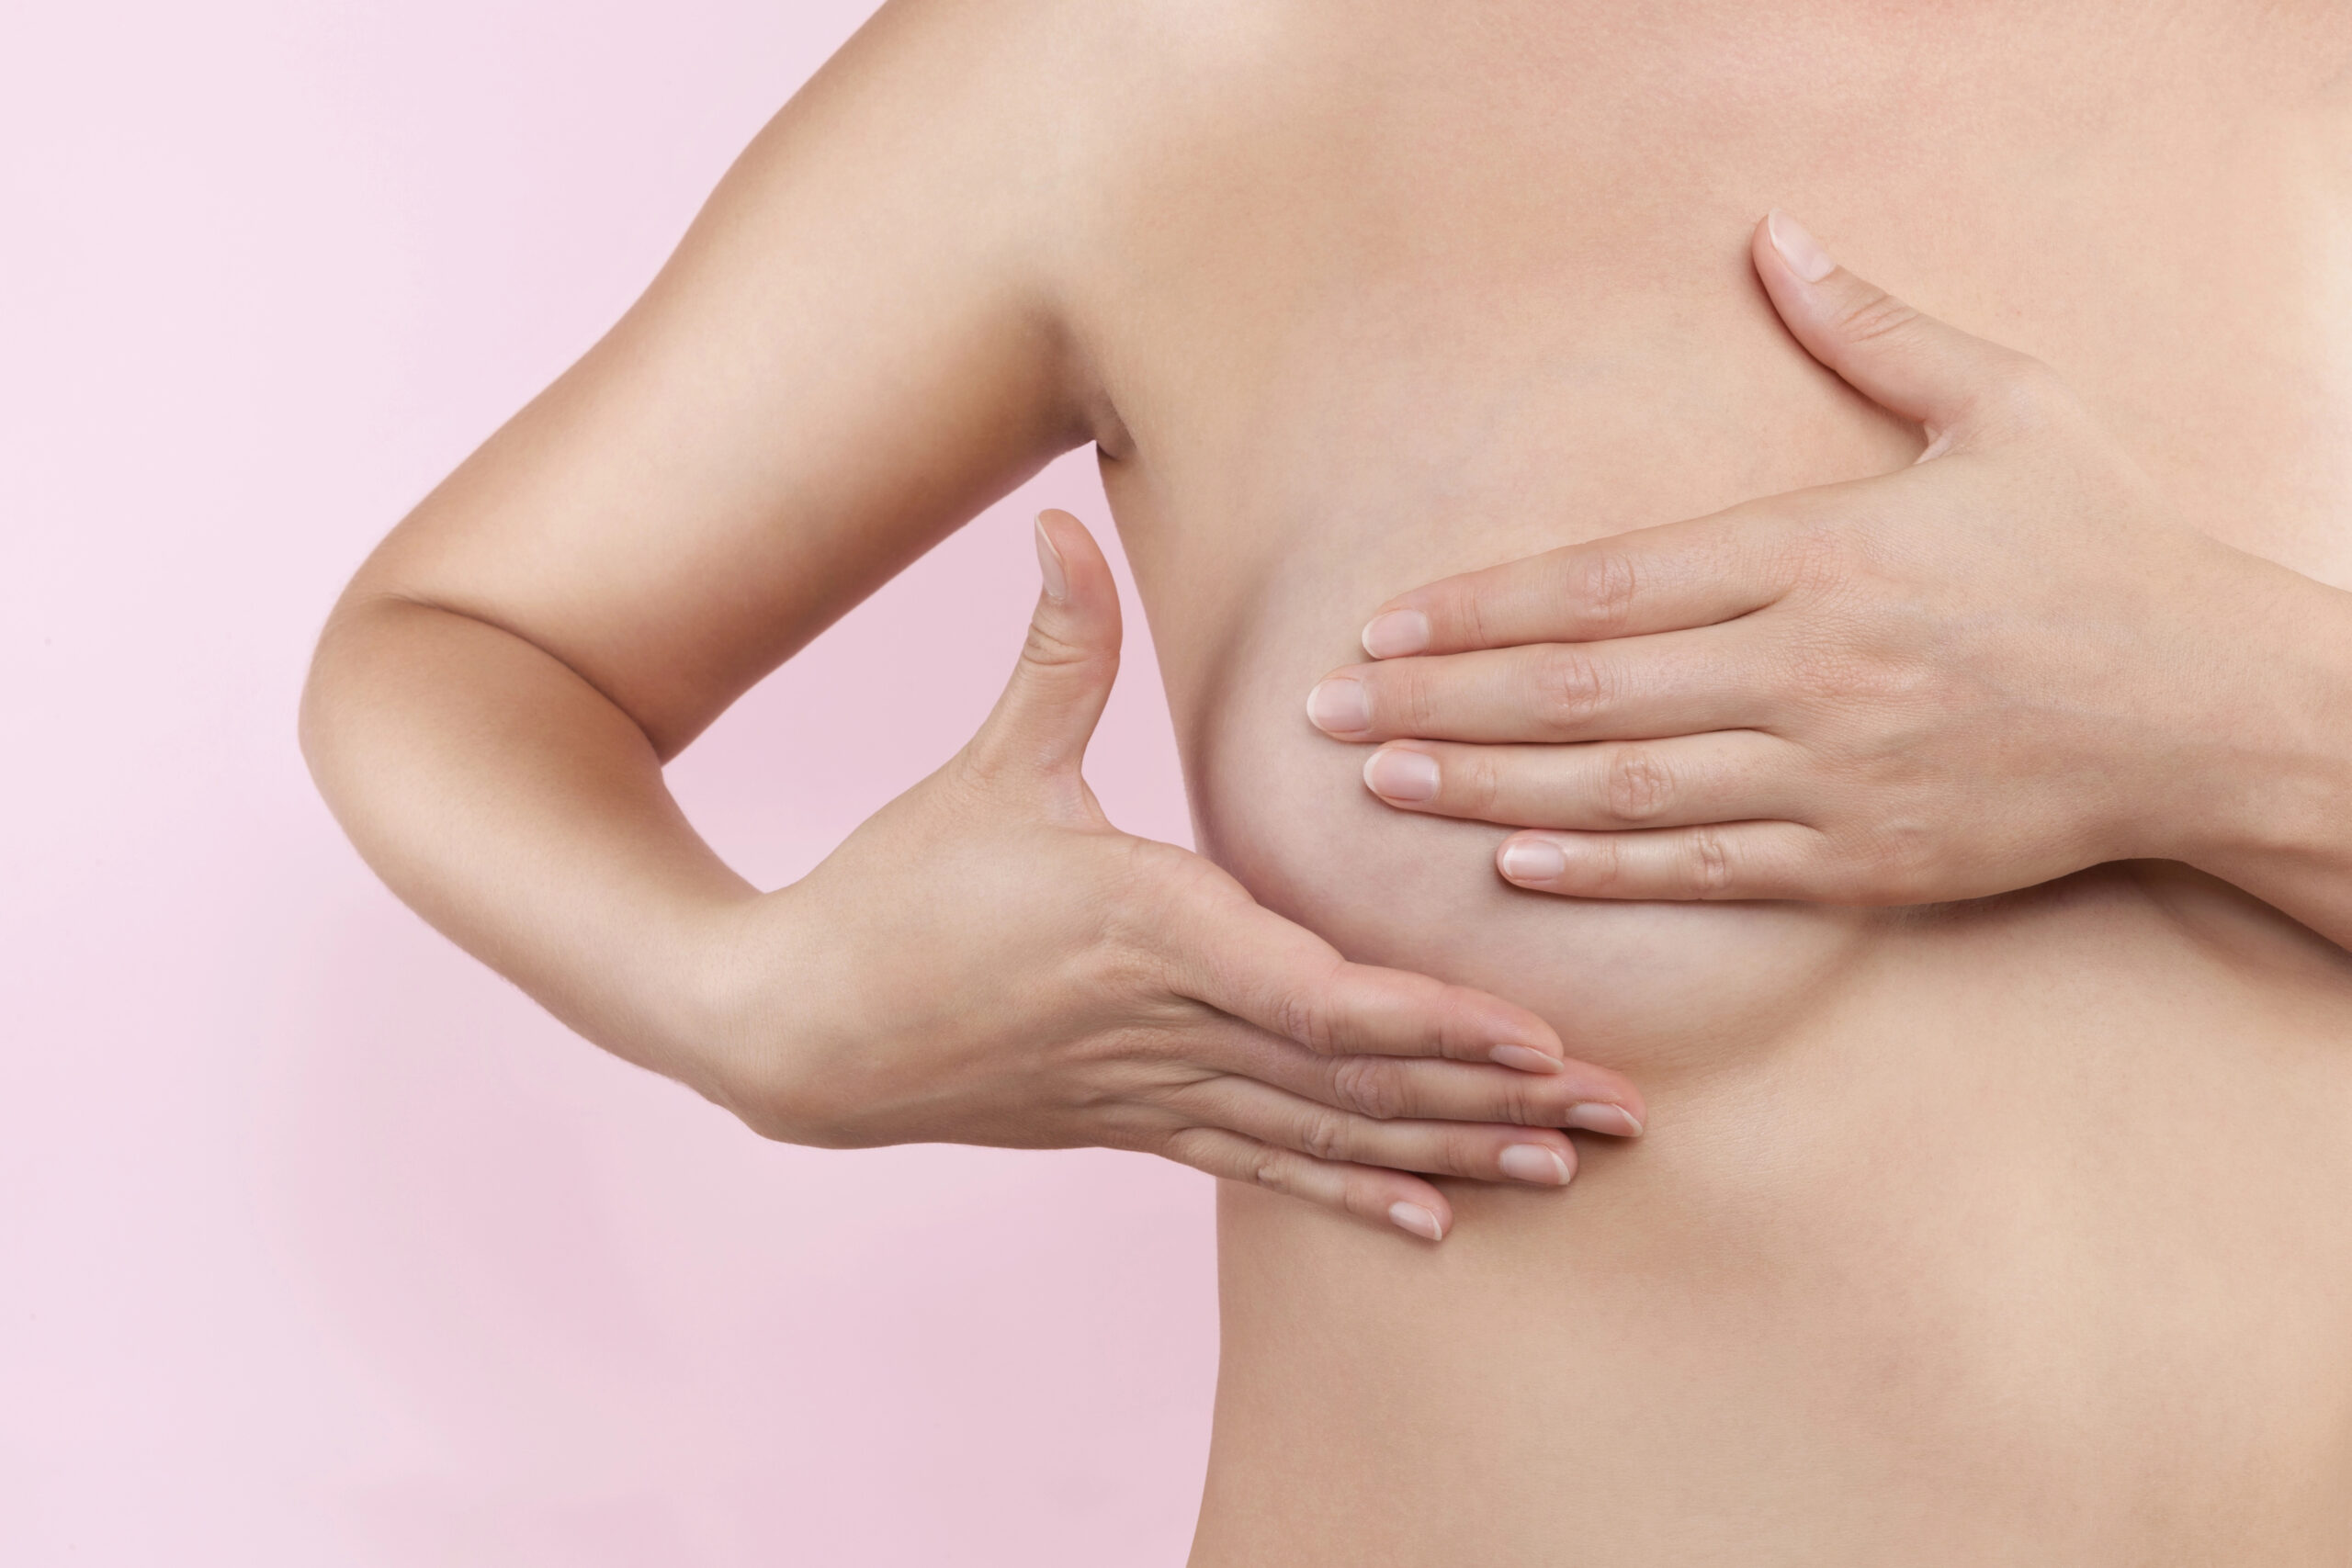 Hypoplastic Breasts, Complete Guide